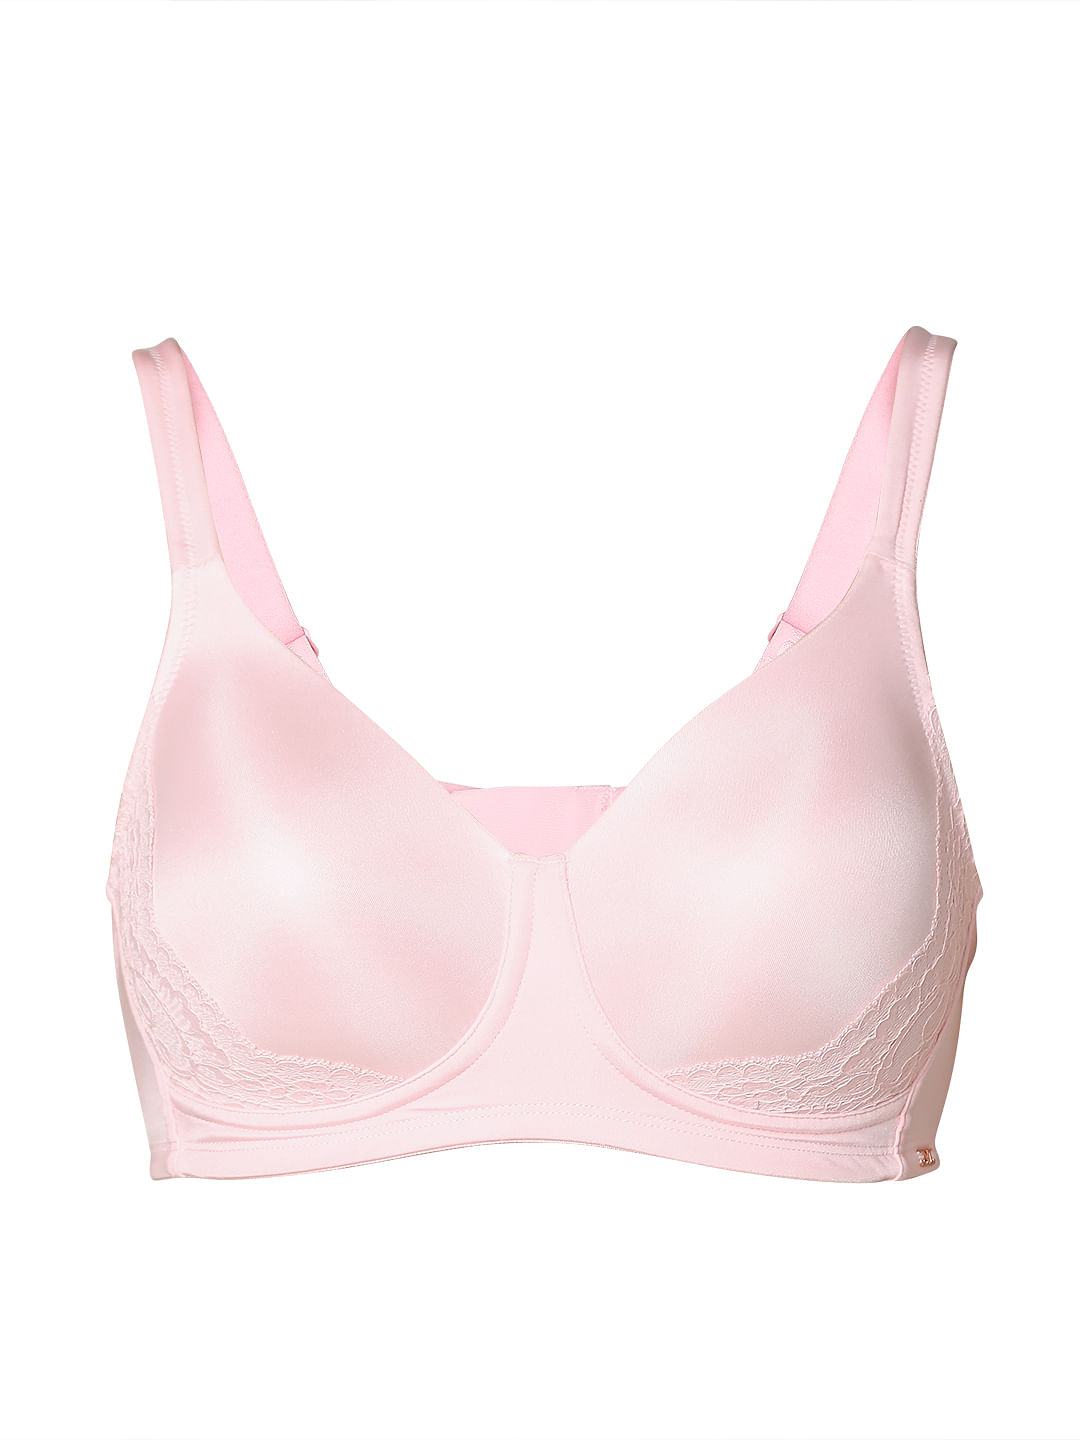 Sofra BR4237PLD - 40D Womens Full Coverage Bra - D Cup Style Intimate  Sets, Size 40D - Pack of 6 